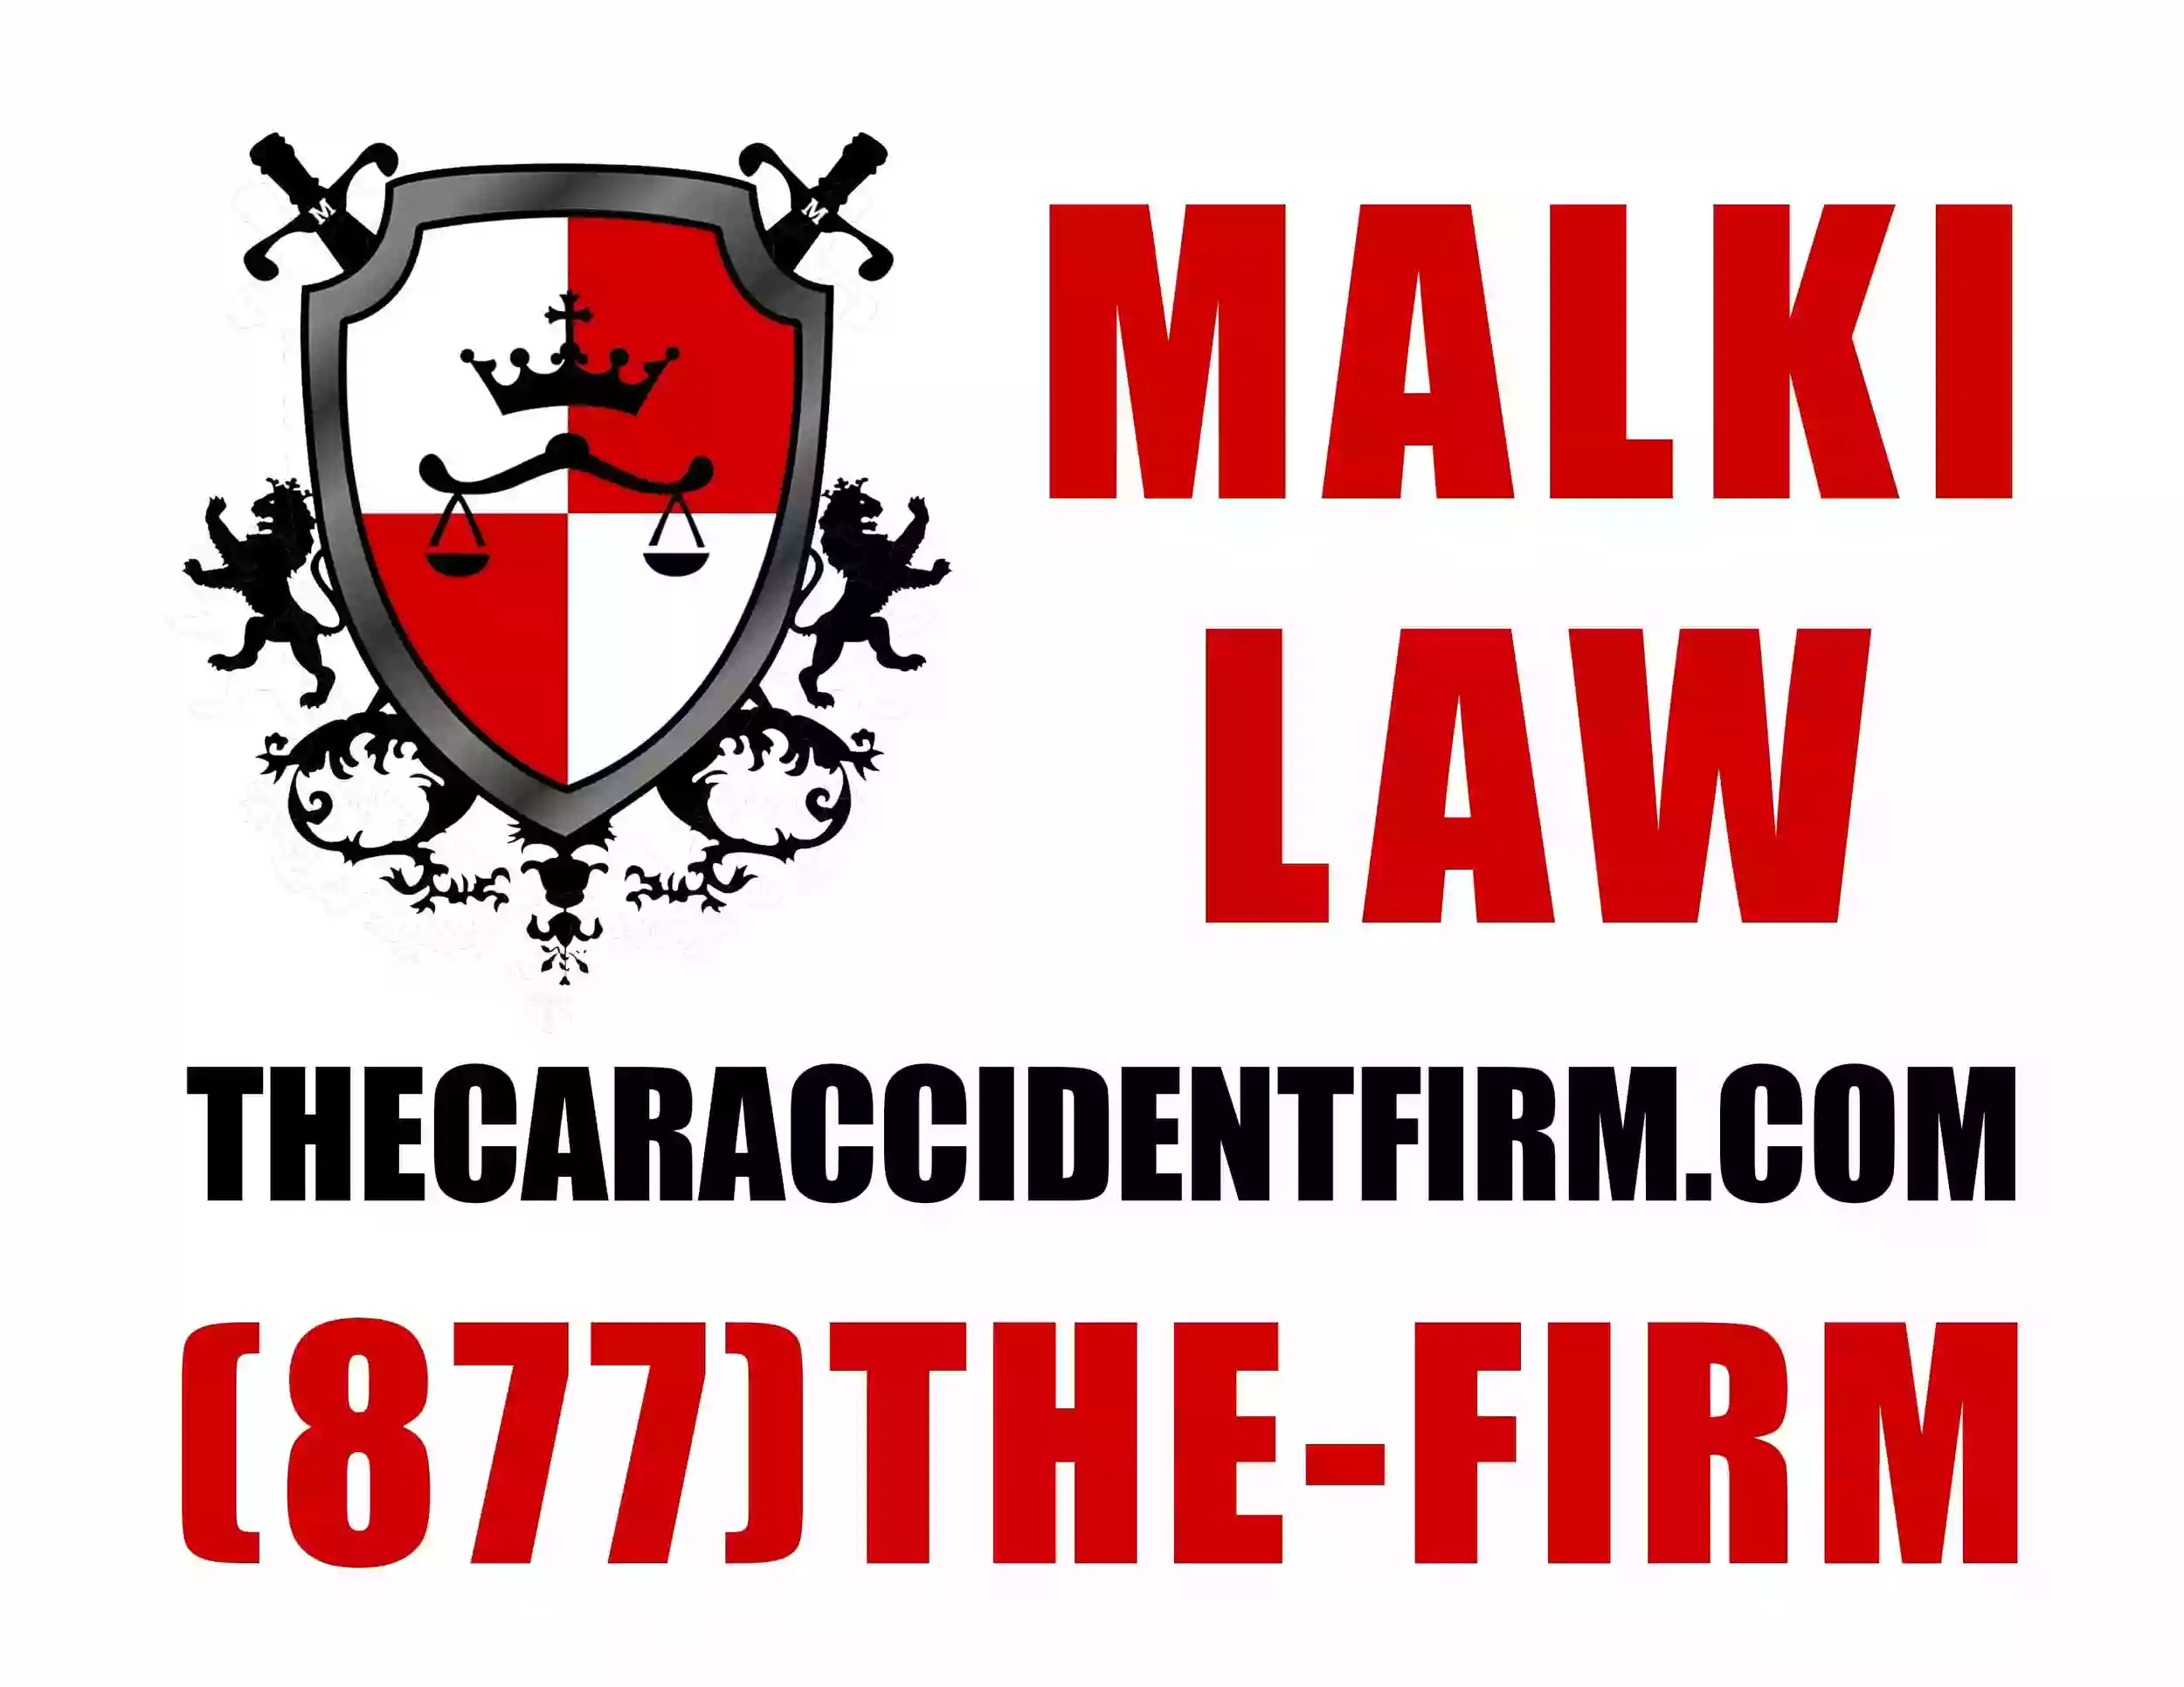 Malki Law 877-THE-FIRM